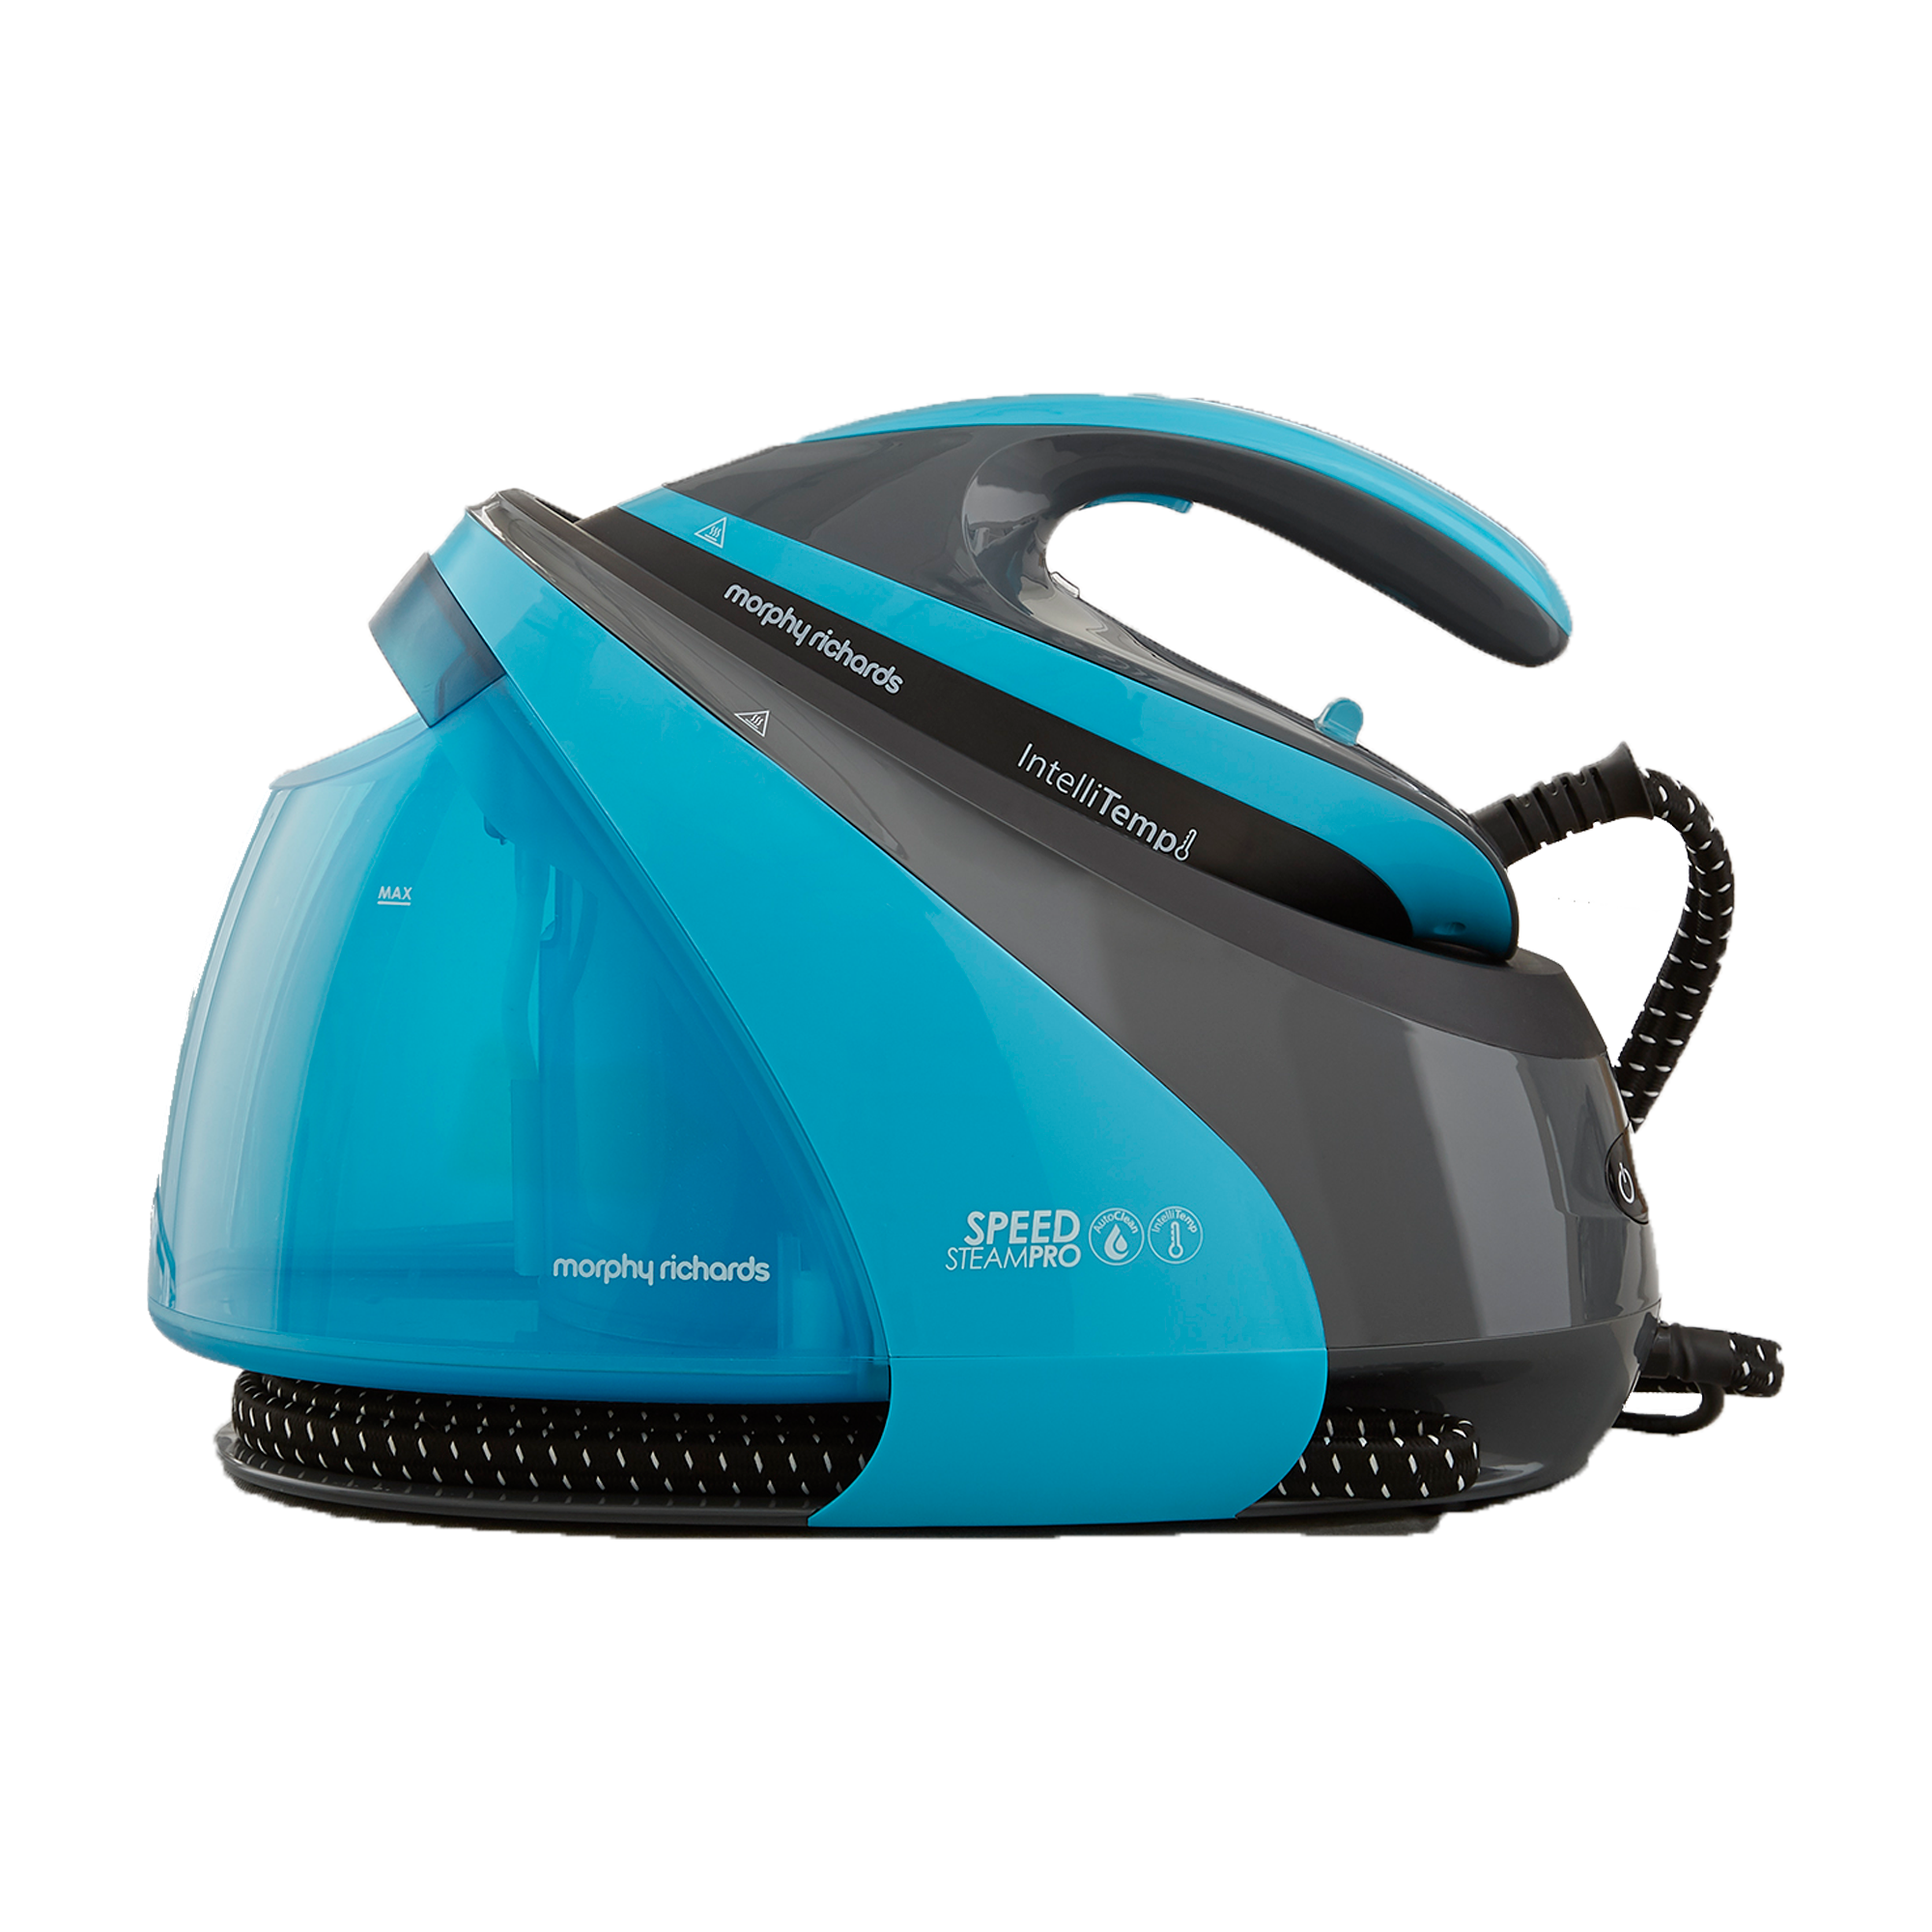 Morphy Richards Morphy Richards Jet Steam Plus 333101 Compact Steam Generator Pink 